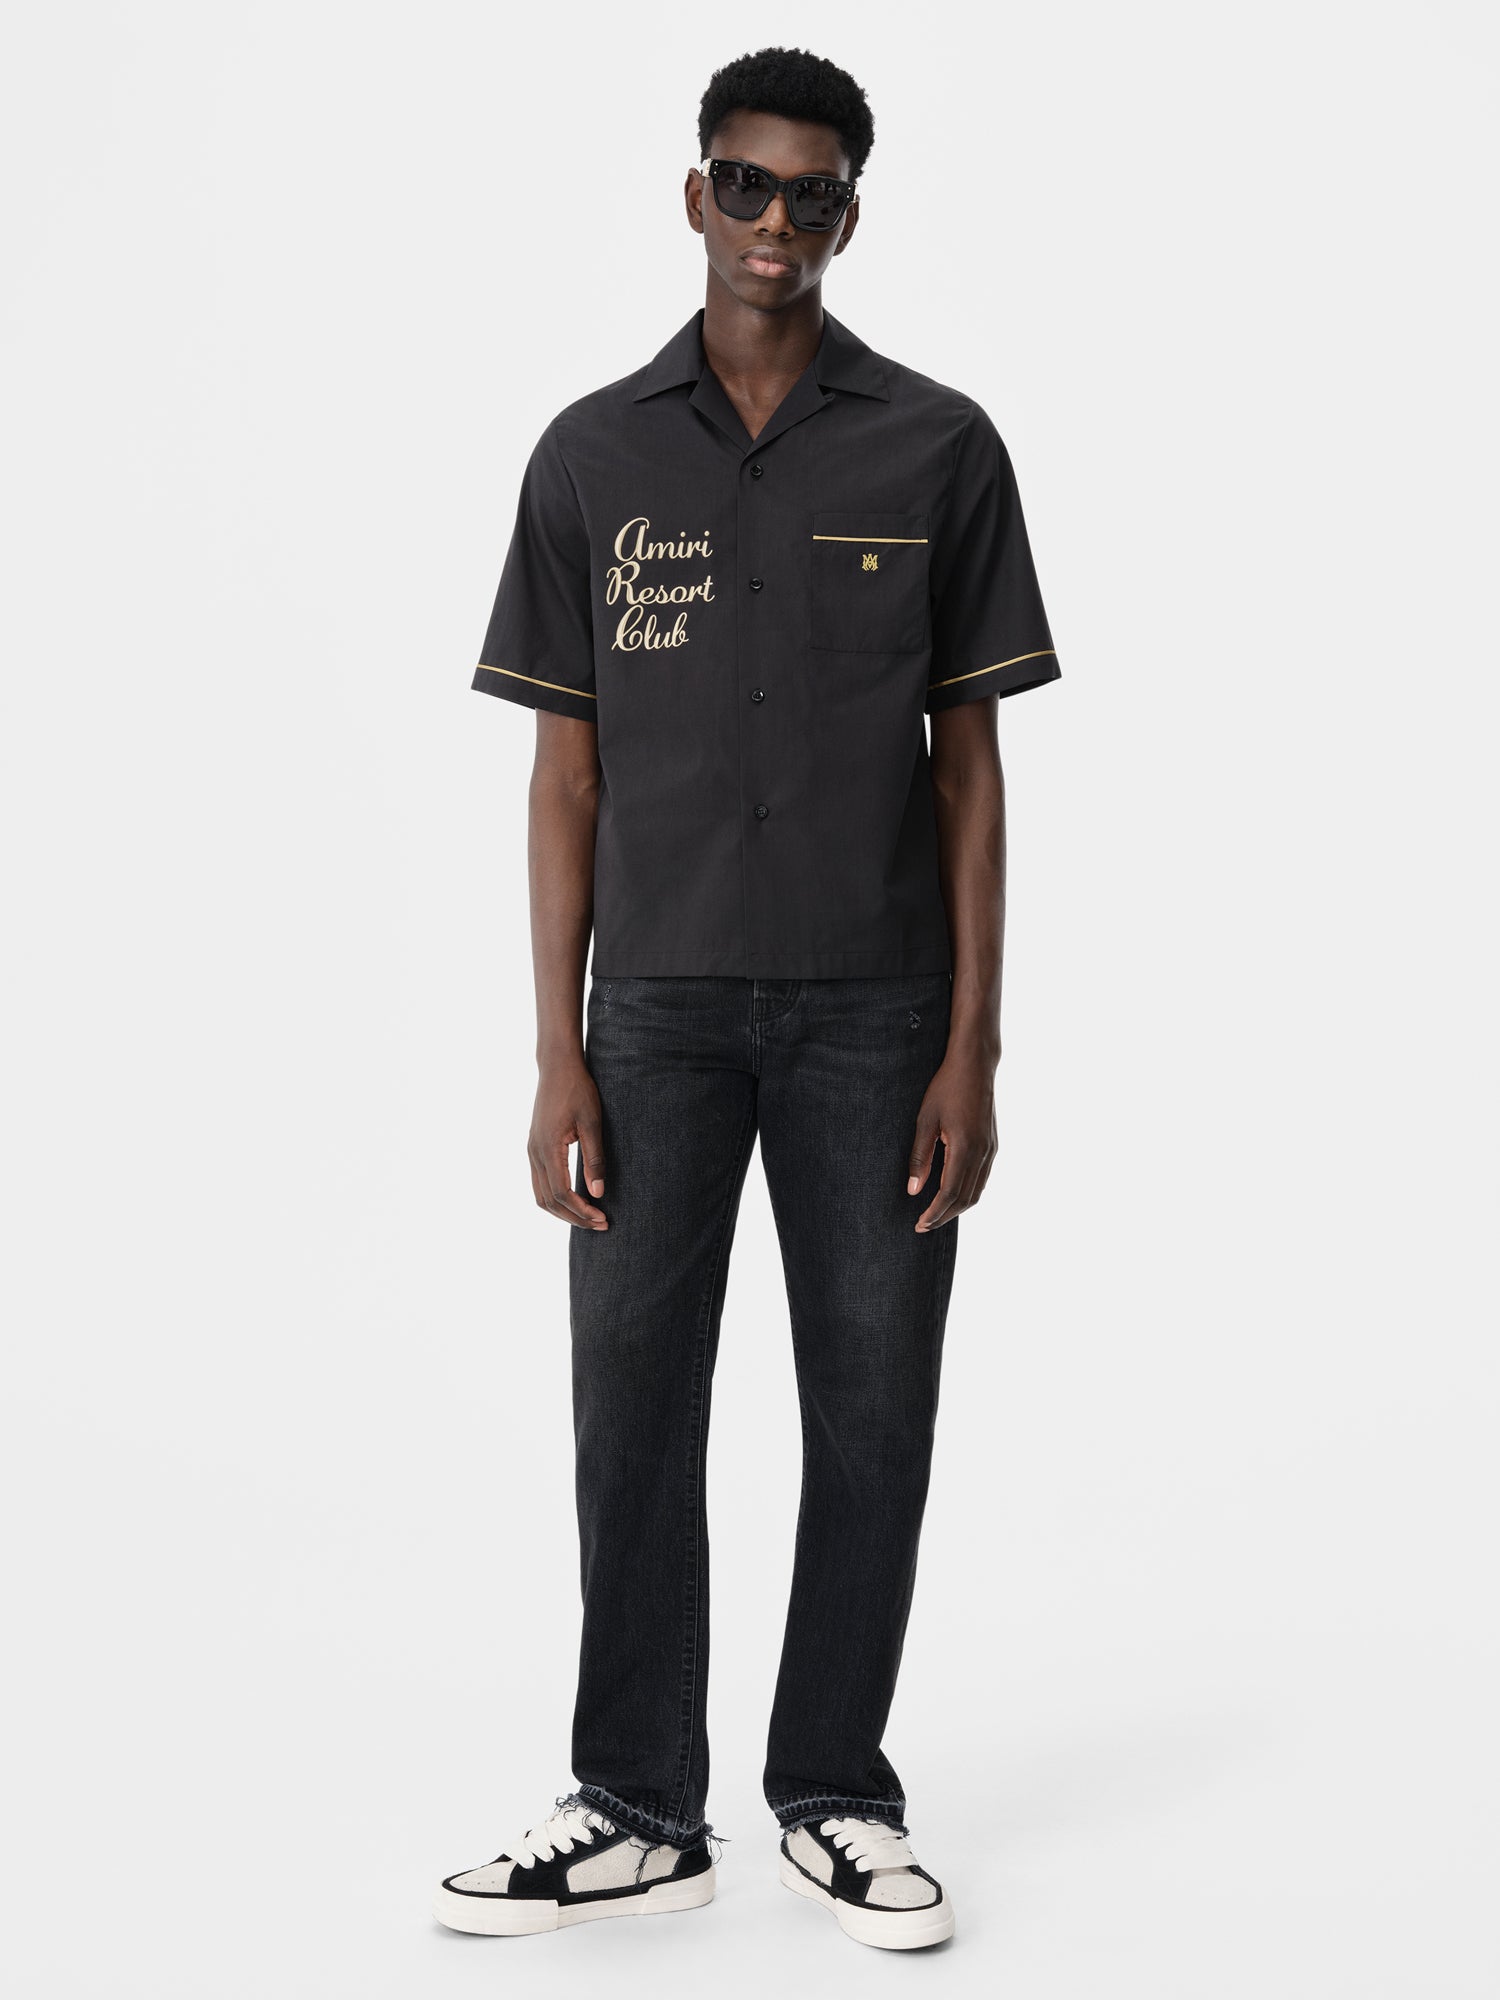 Product RESORT CLUB EMBROIDERED SHIRT - Black featured image